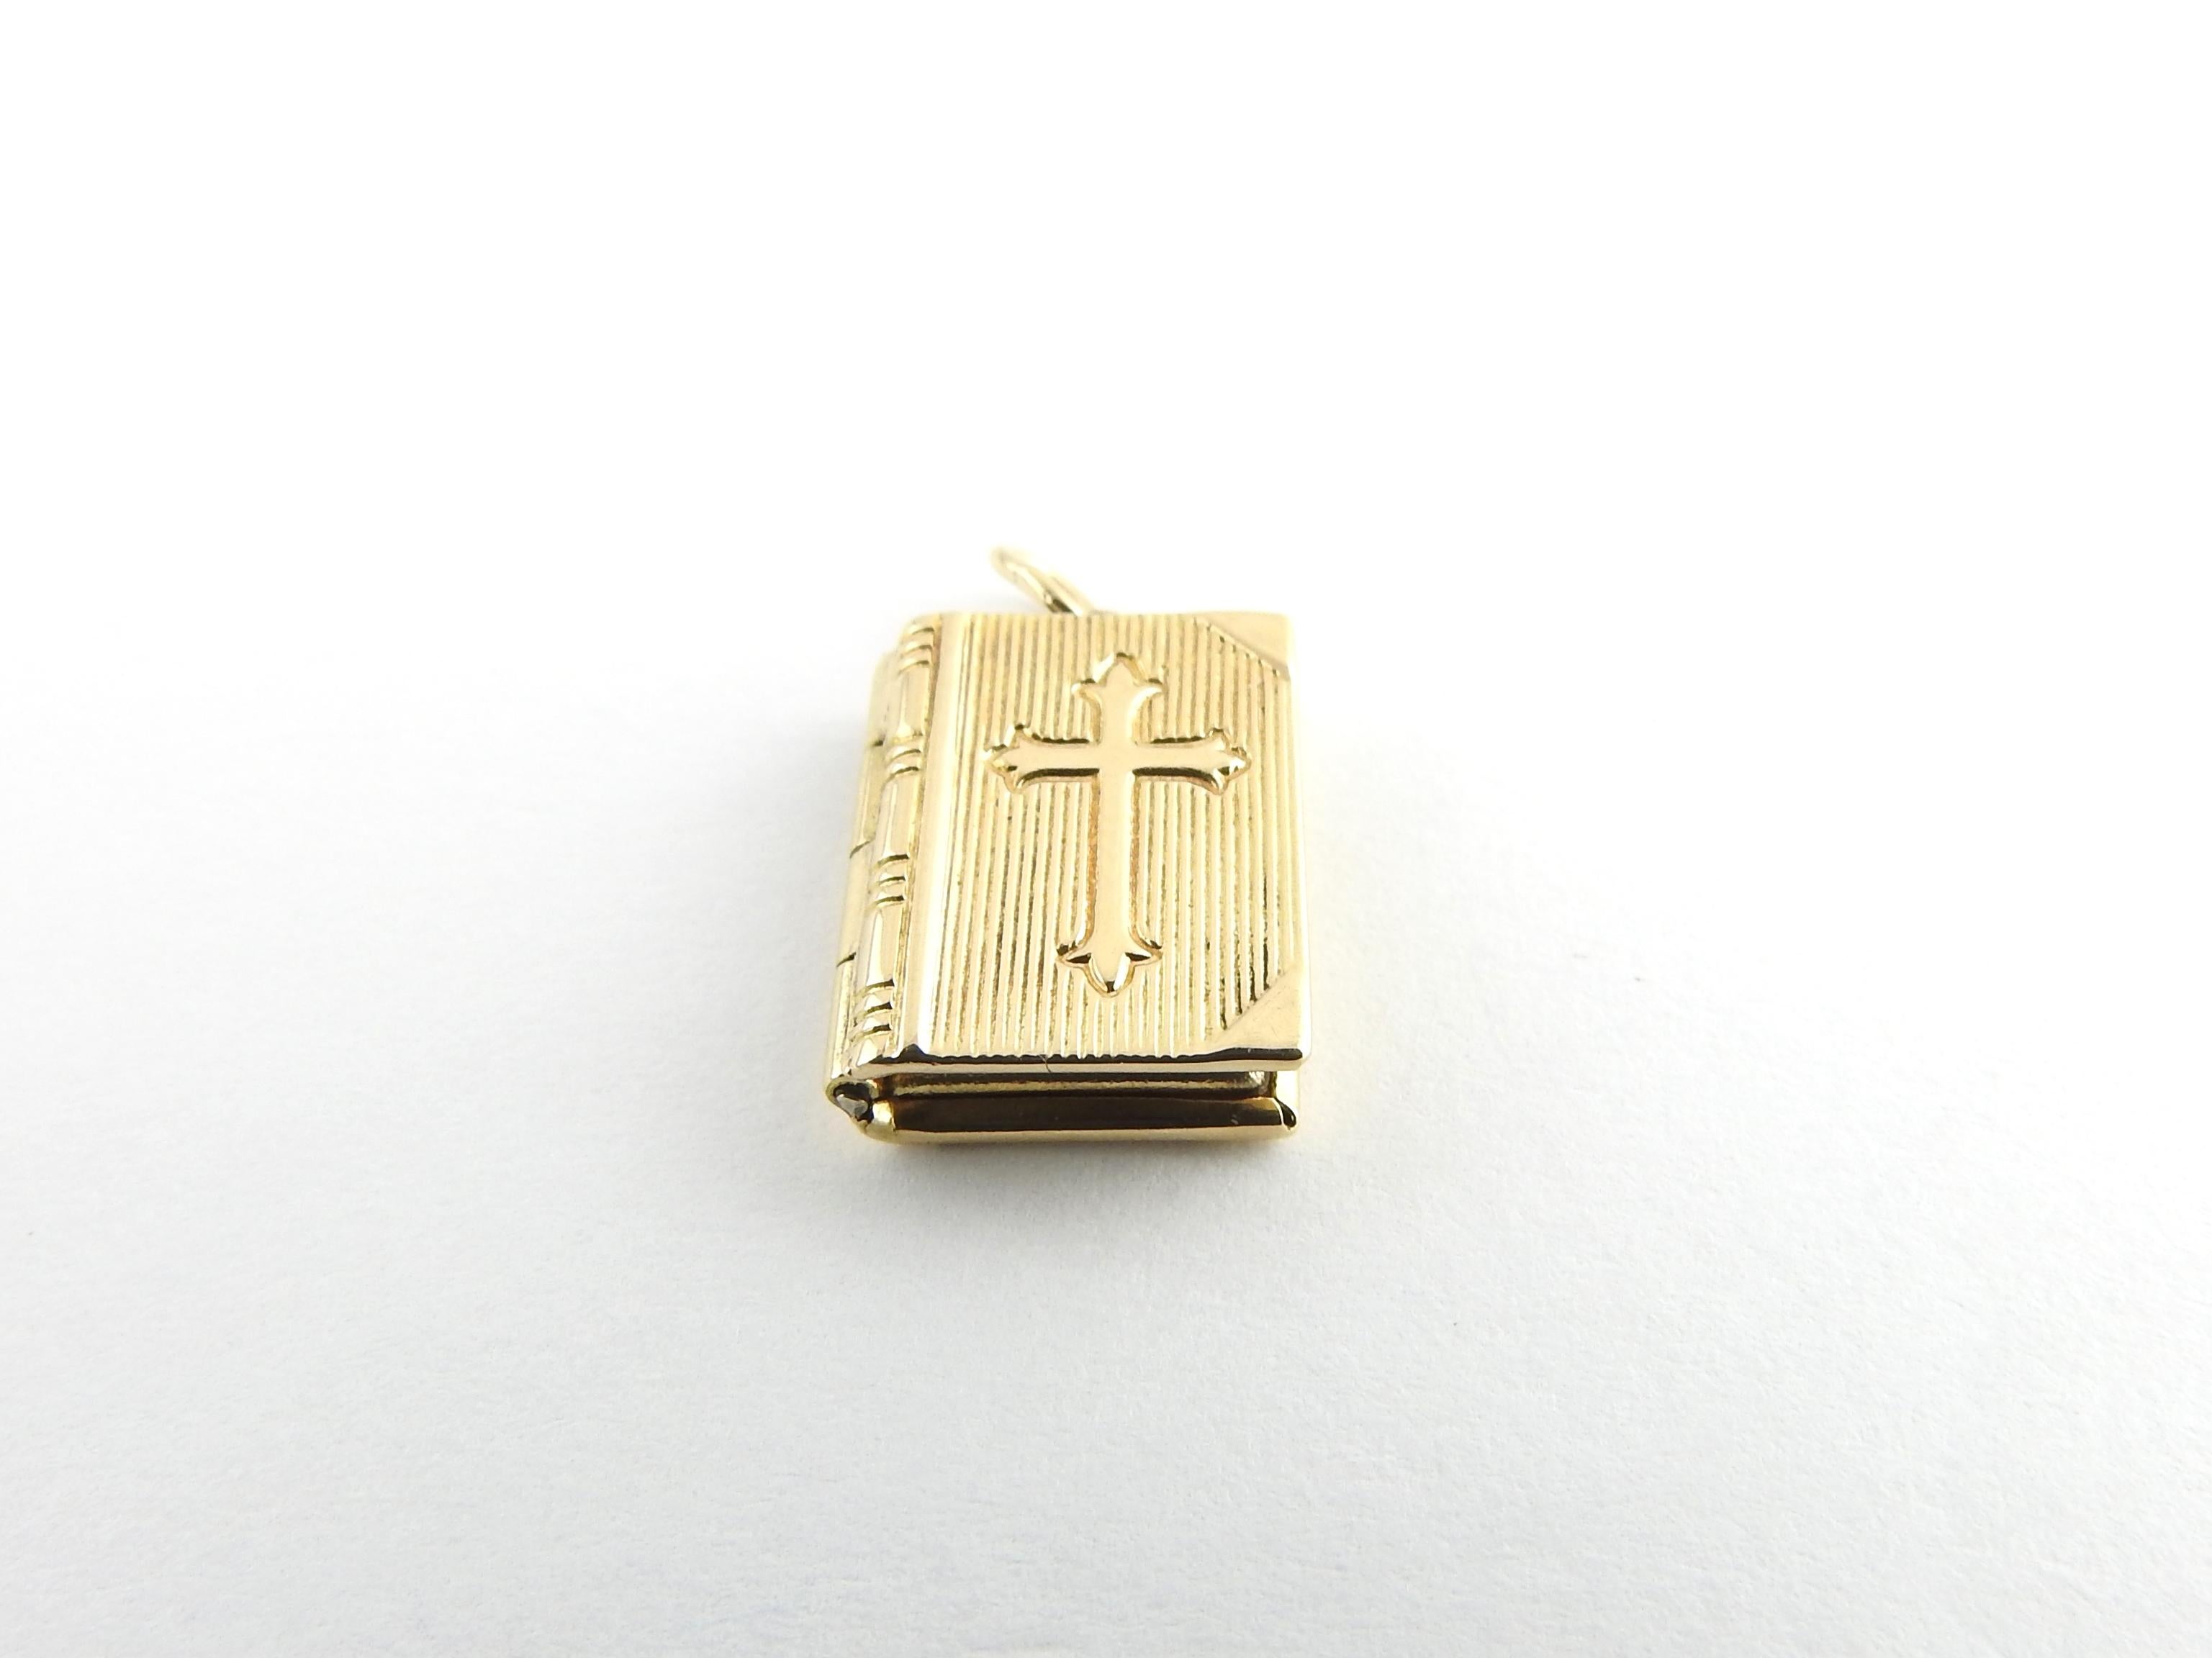 Vintage 14 Karat Yellow Gold Bible Lord's Prayer Charm

This lovely Bible charm features a cross on its cover and opens to reveal The Lord's Prayer. Beautifully detailed in 14K yellow gold.

Size: 14 mm x 11 mm (actual charm)

Weight: 1.4 dwt. / 2.3